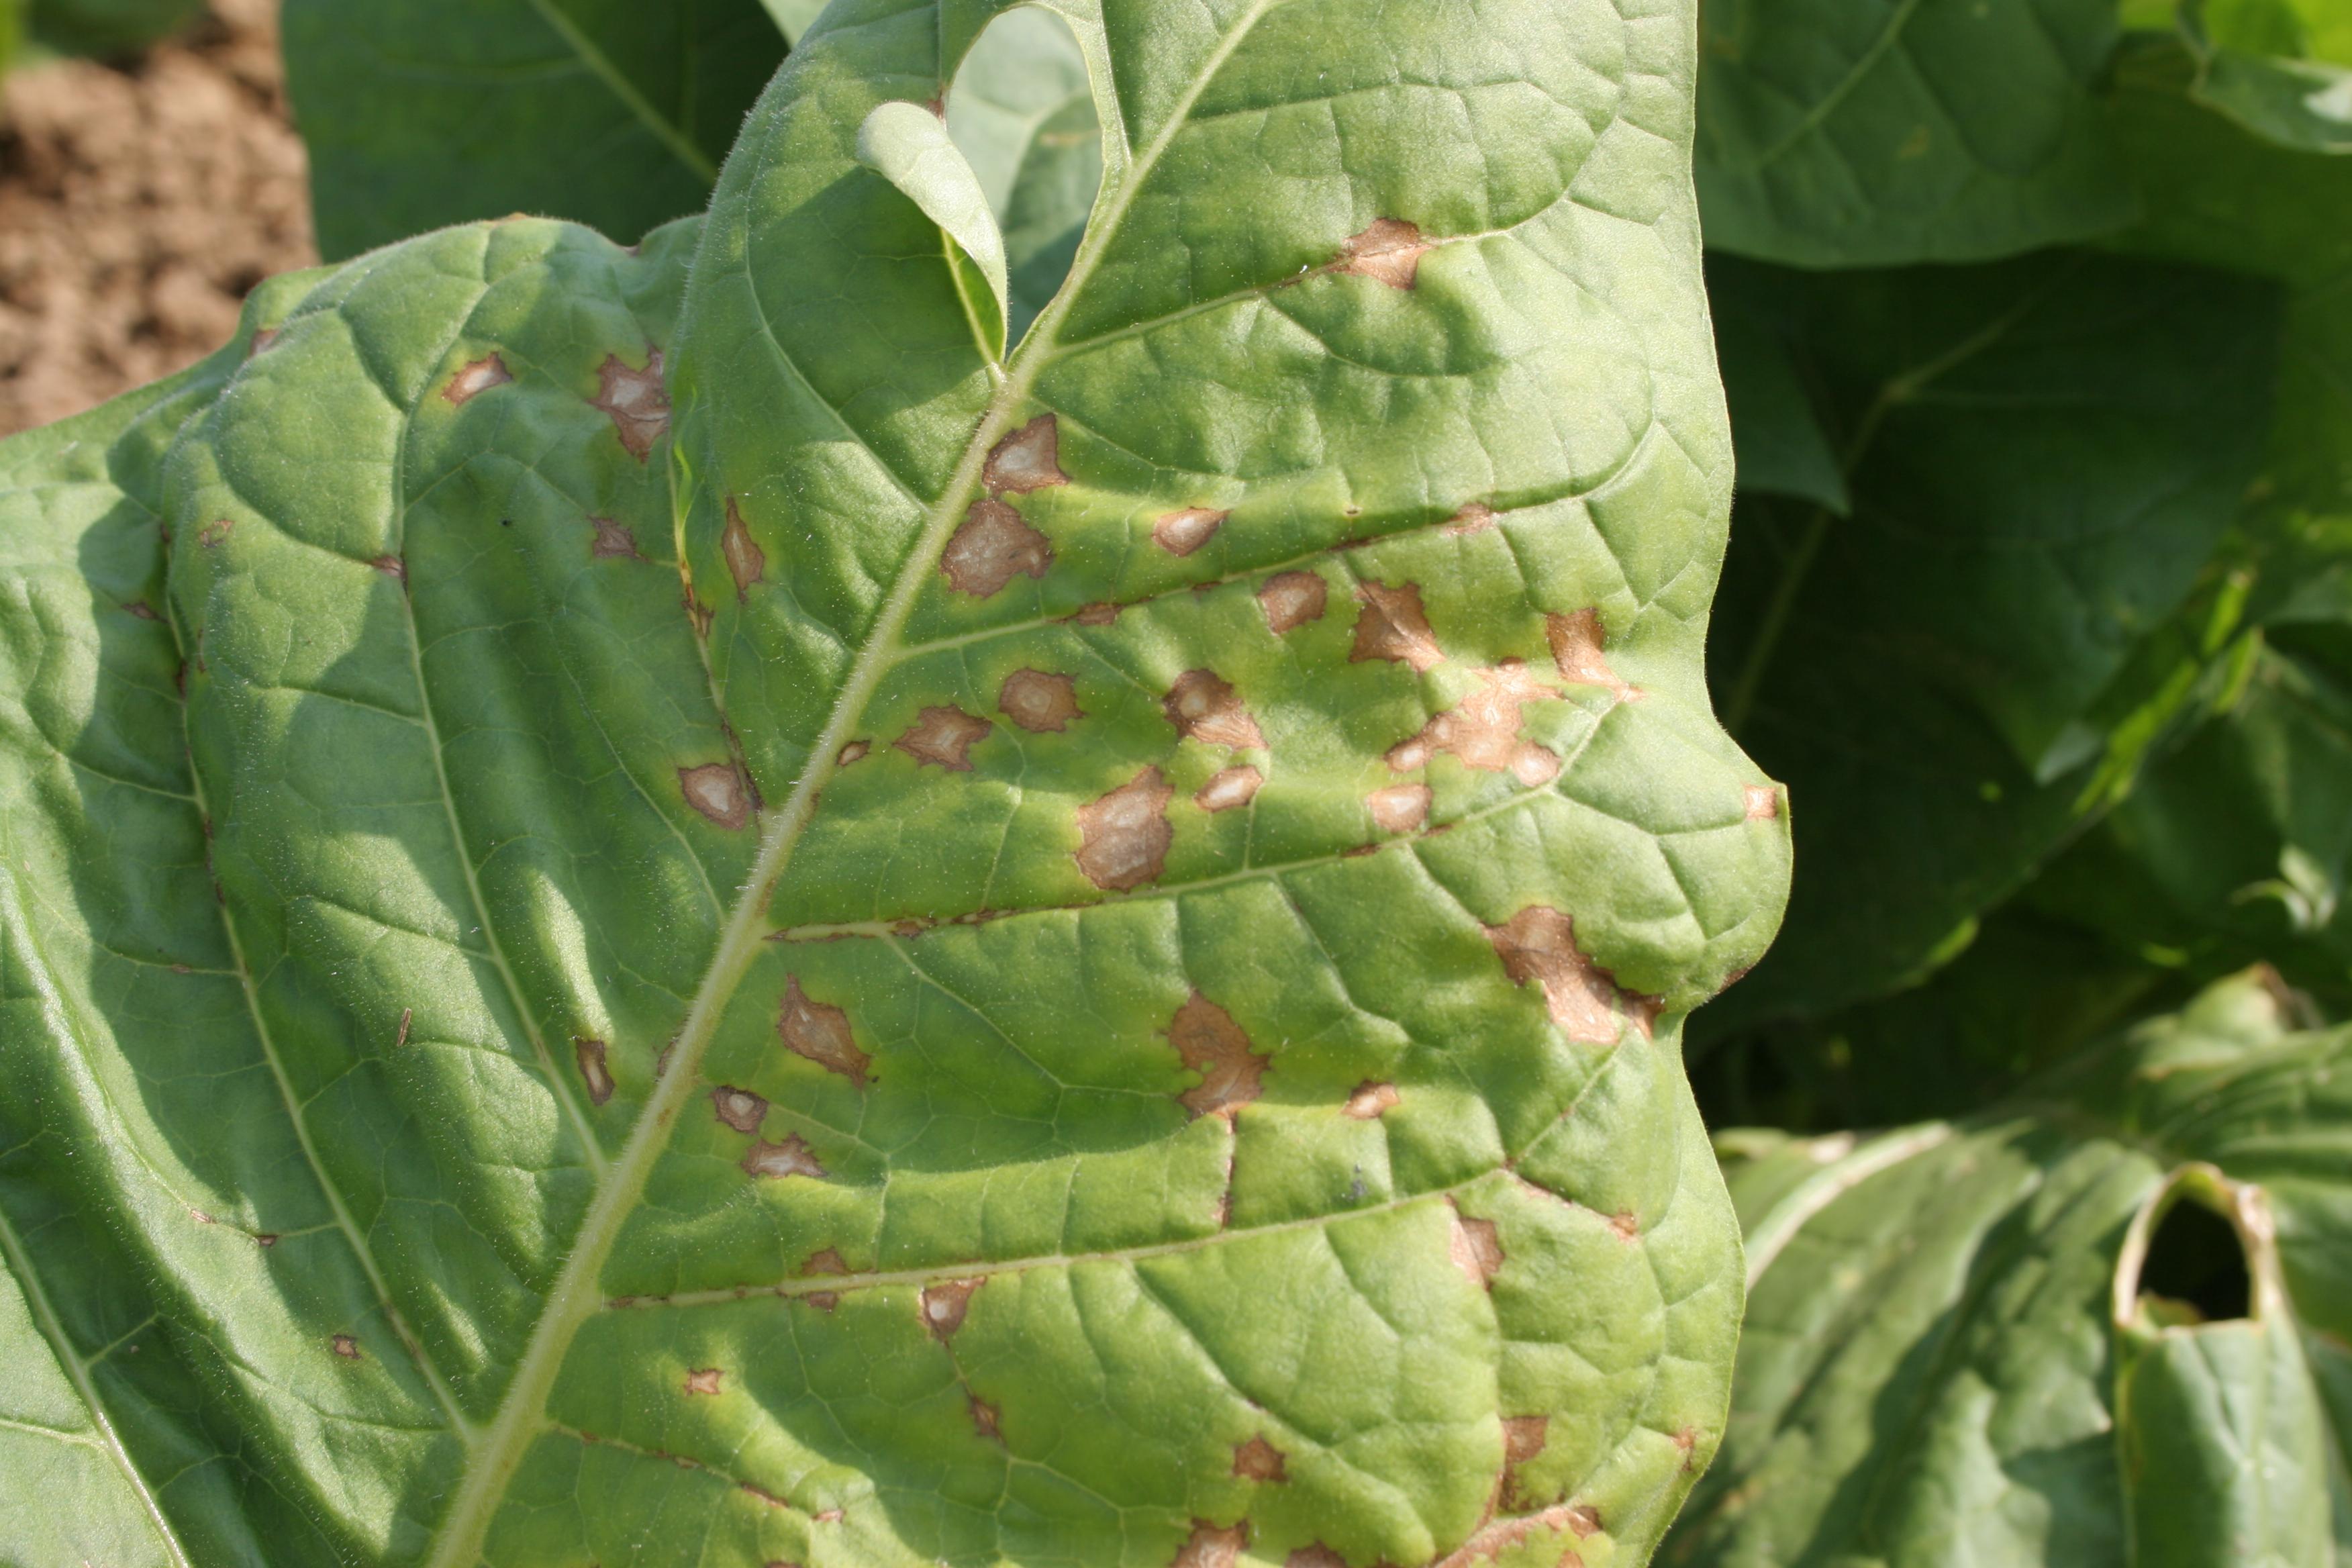 Necrotic (brown) zonate spots and rings may occur on younger leaves.  Spots may merge together to form larger necrotic areas. (Photo: Kenneth Seebold, UK)